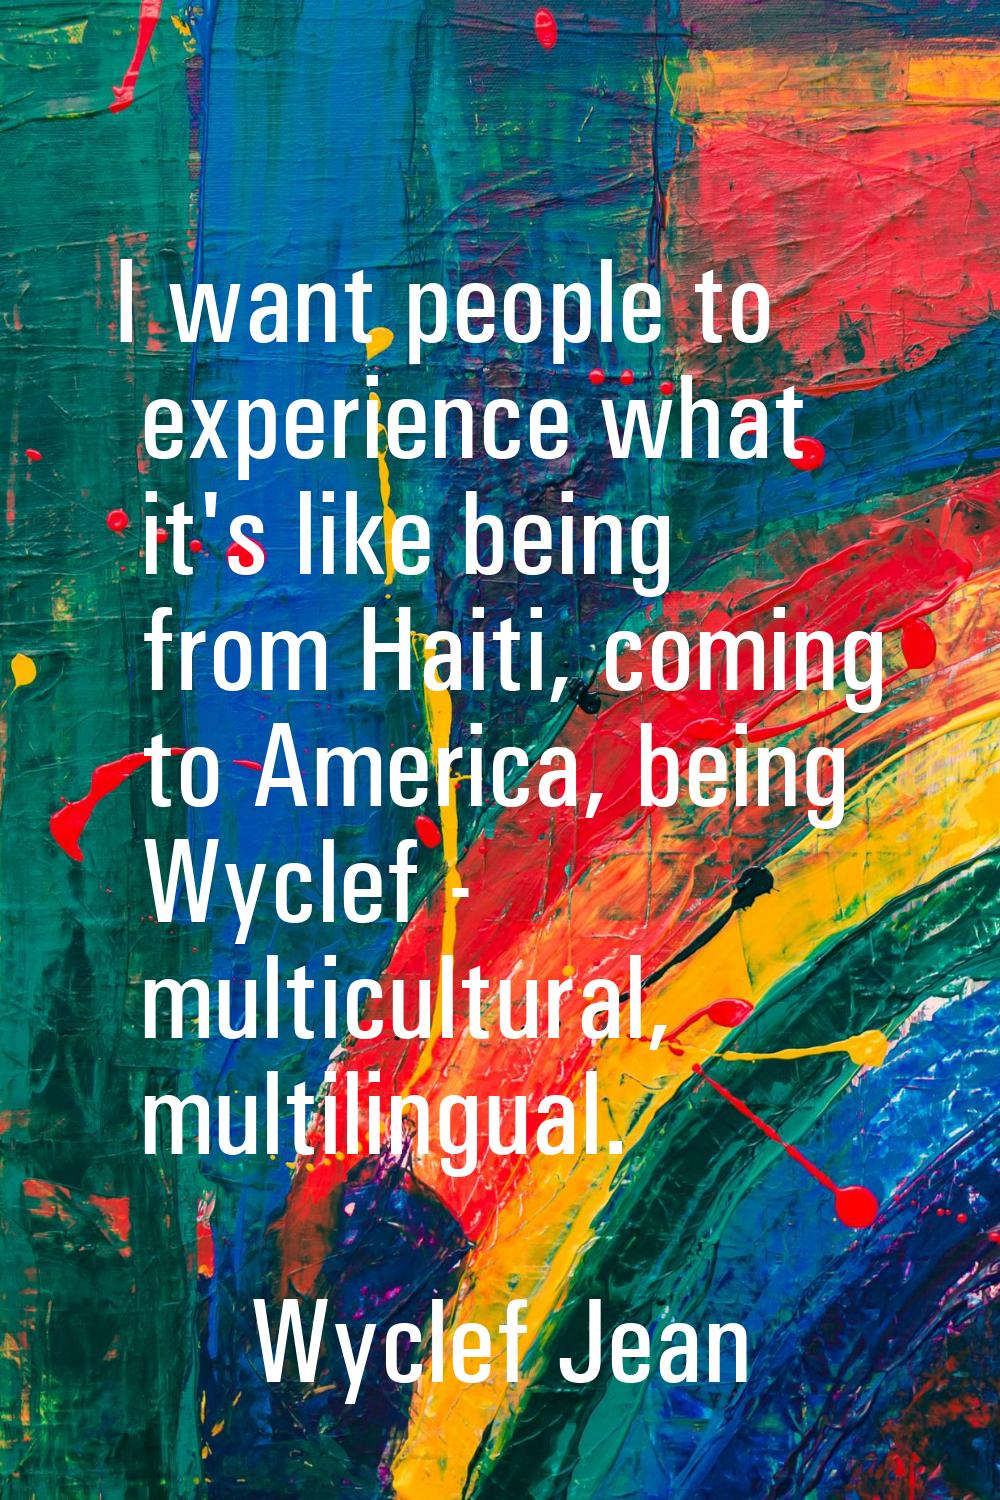 I want people to experience what it's like being from Haiti, coming to America, being Wyclef - mult